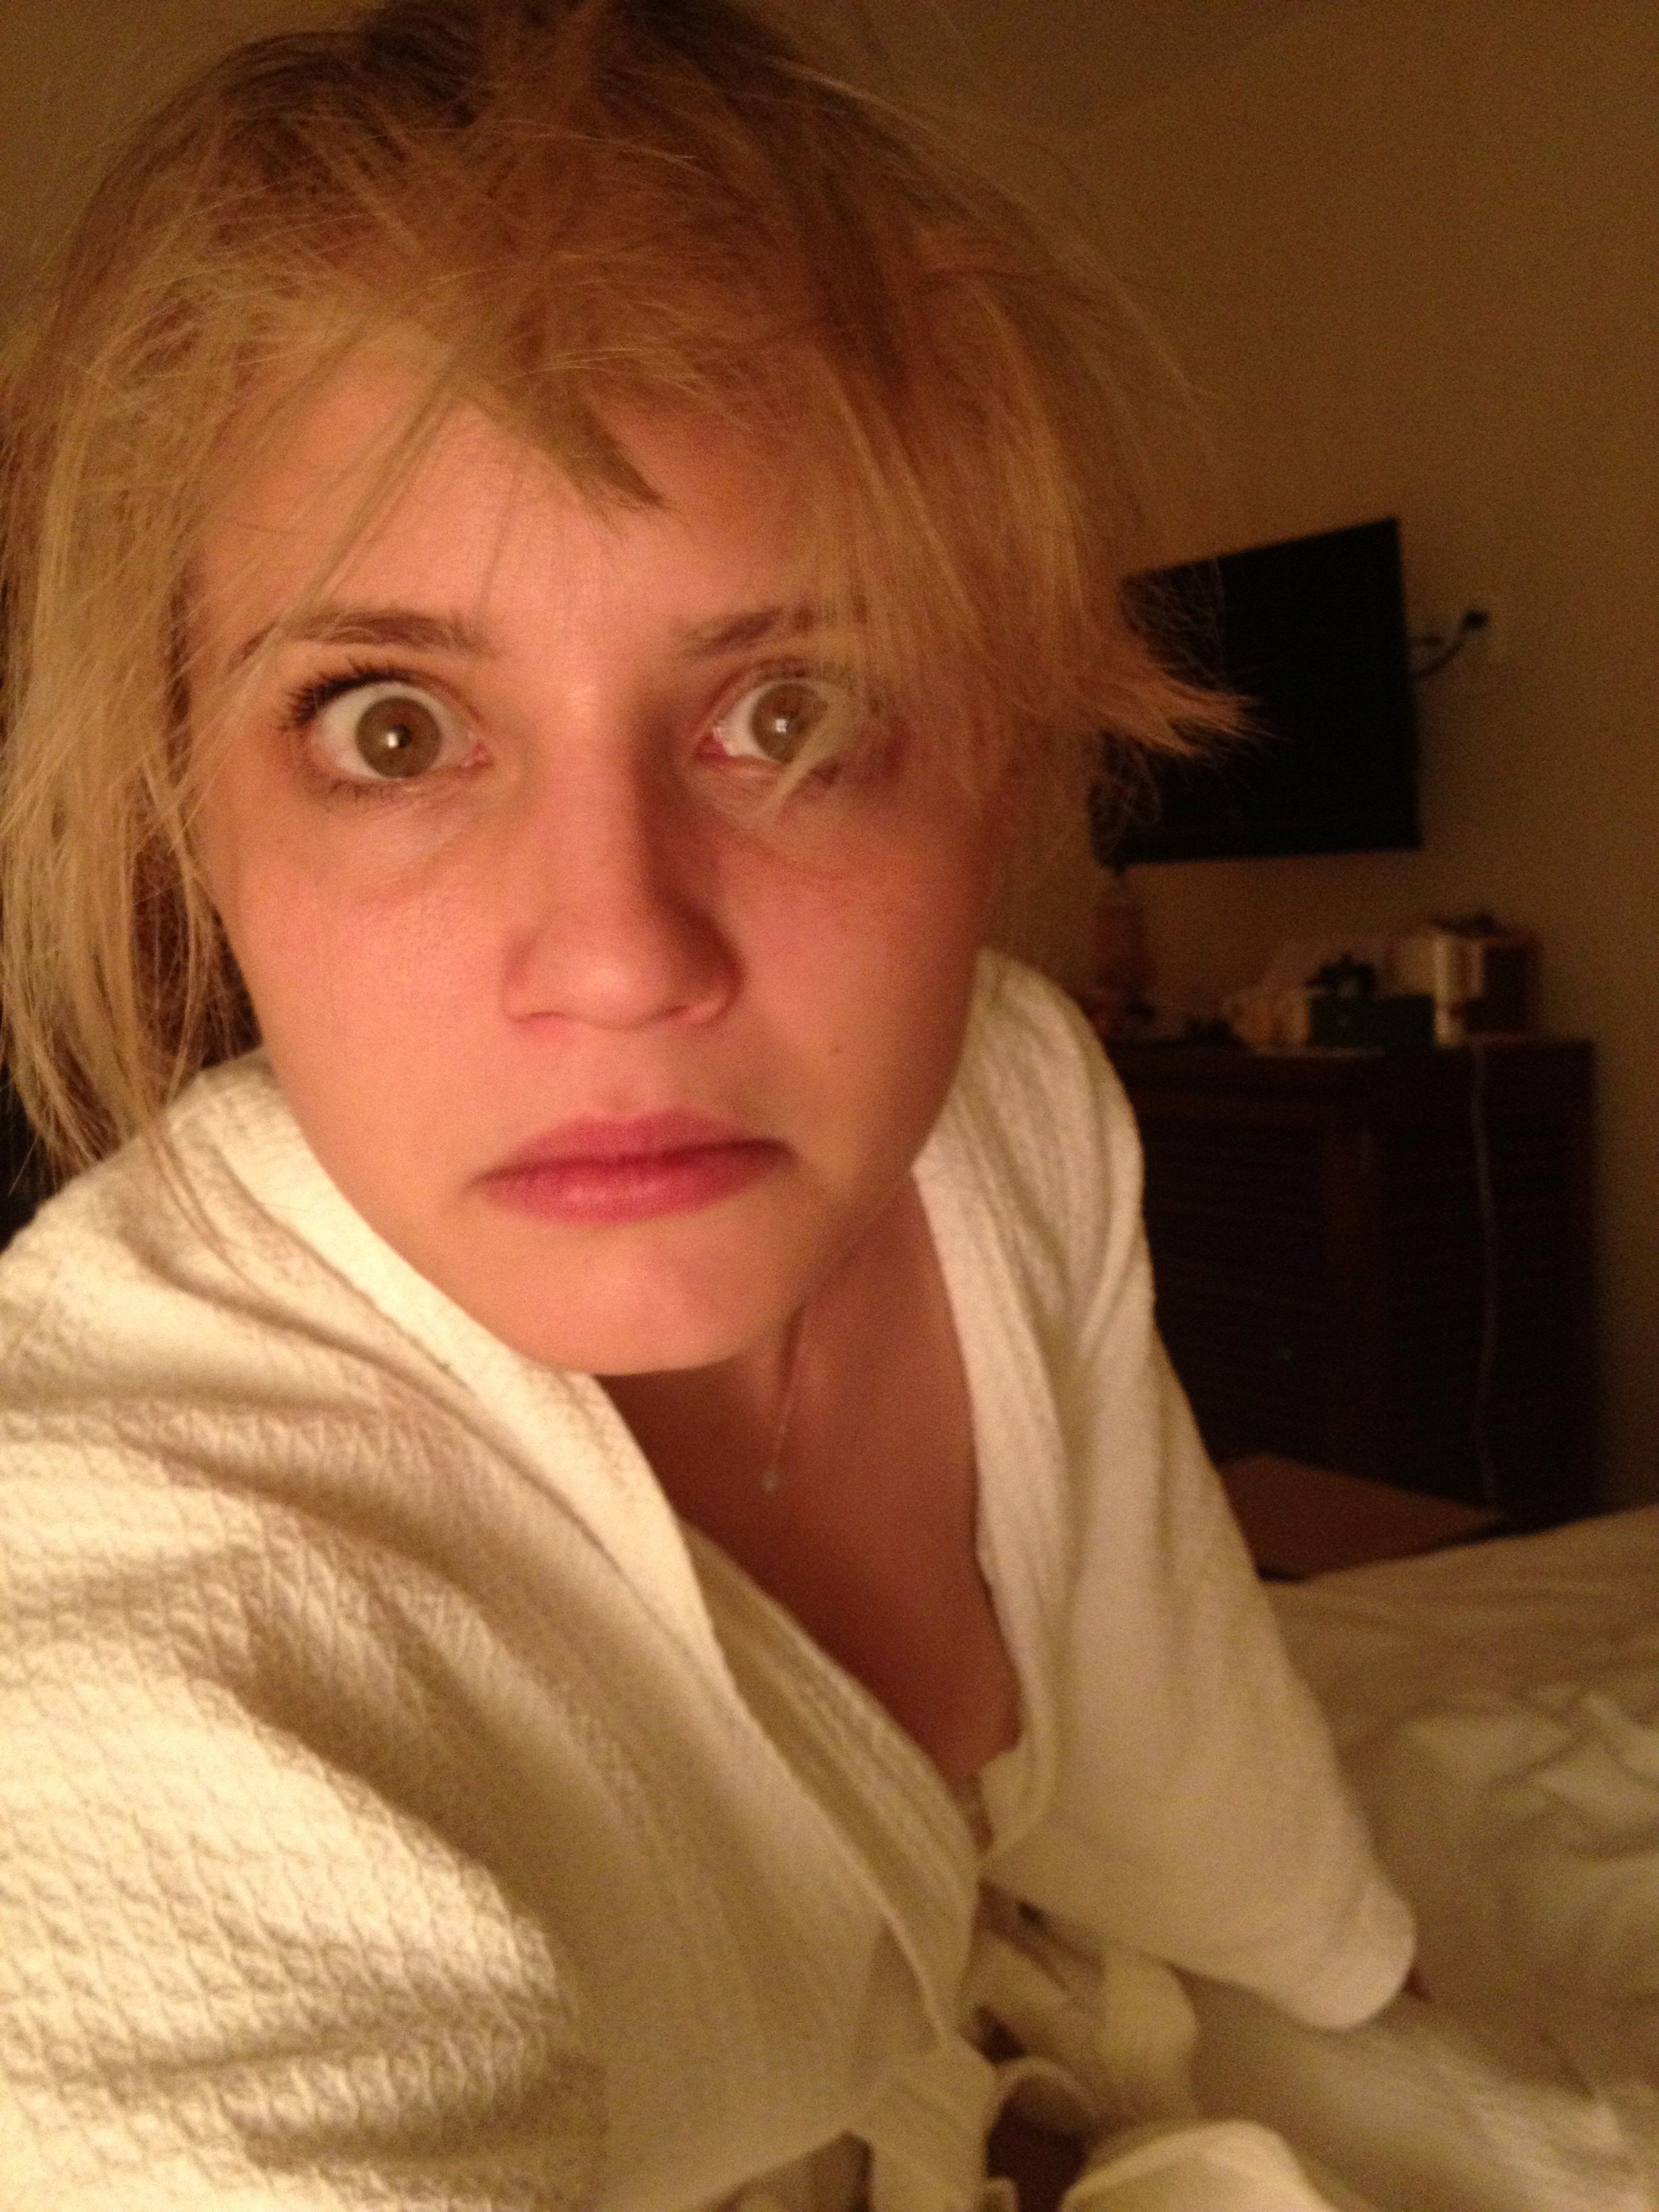 Dianna Agron Nude Photos Leaked The Fappening